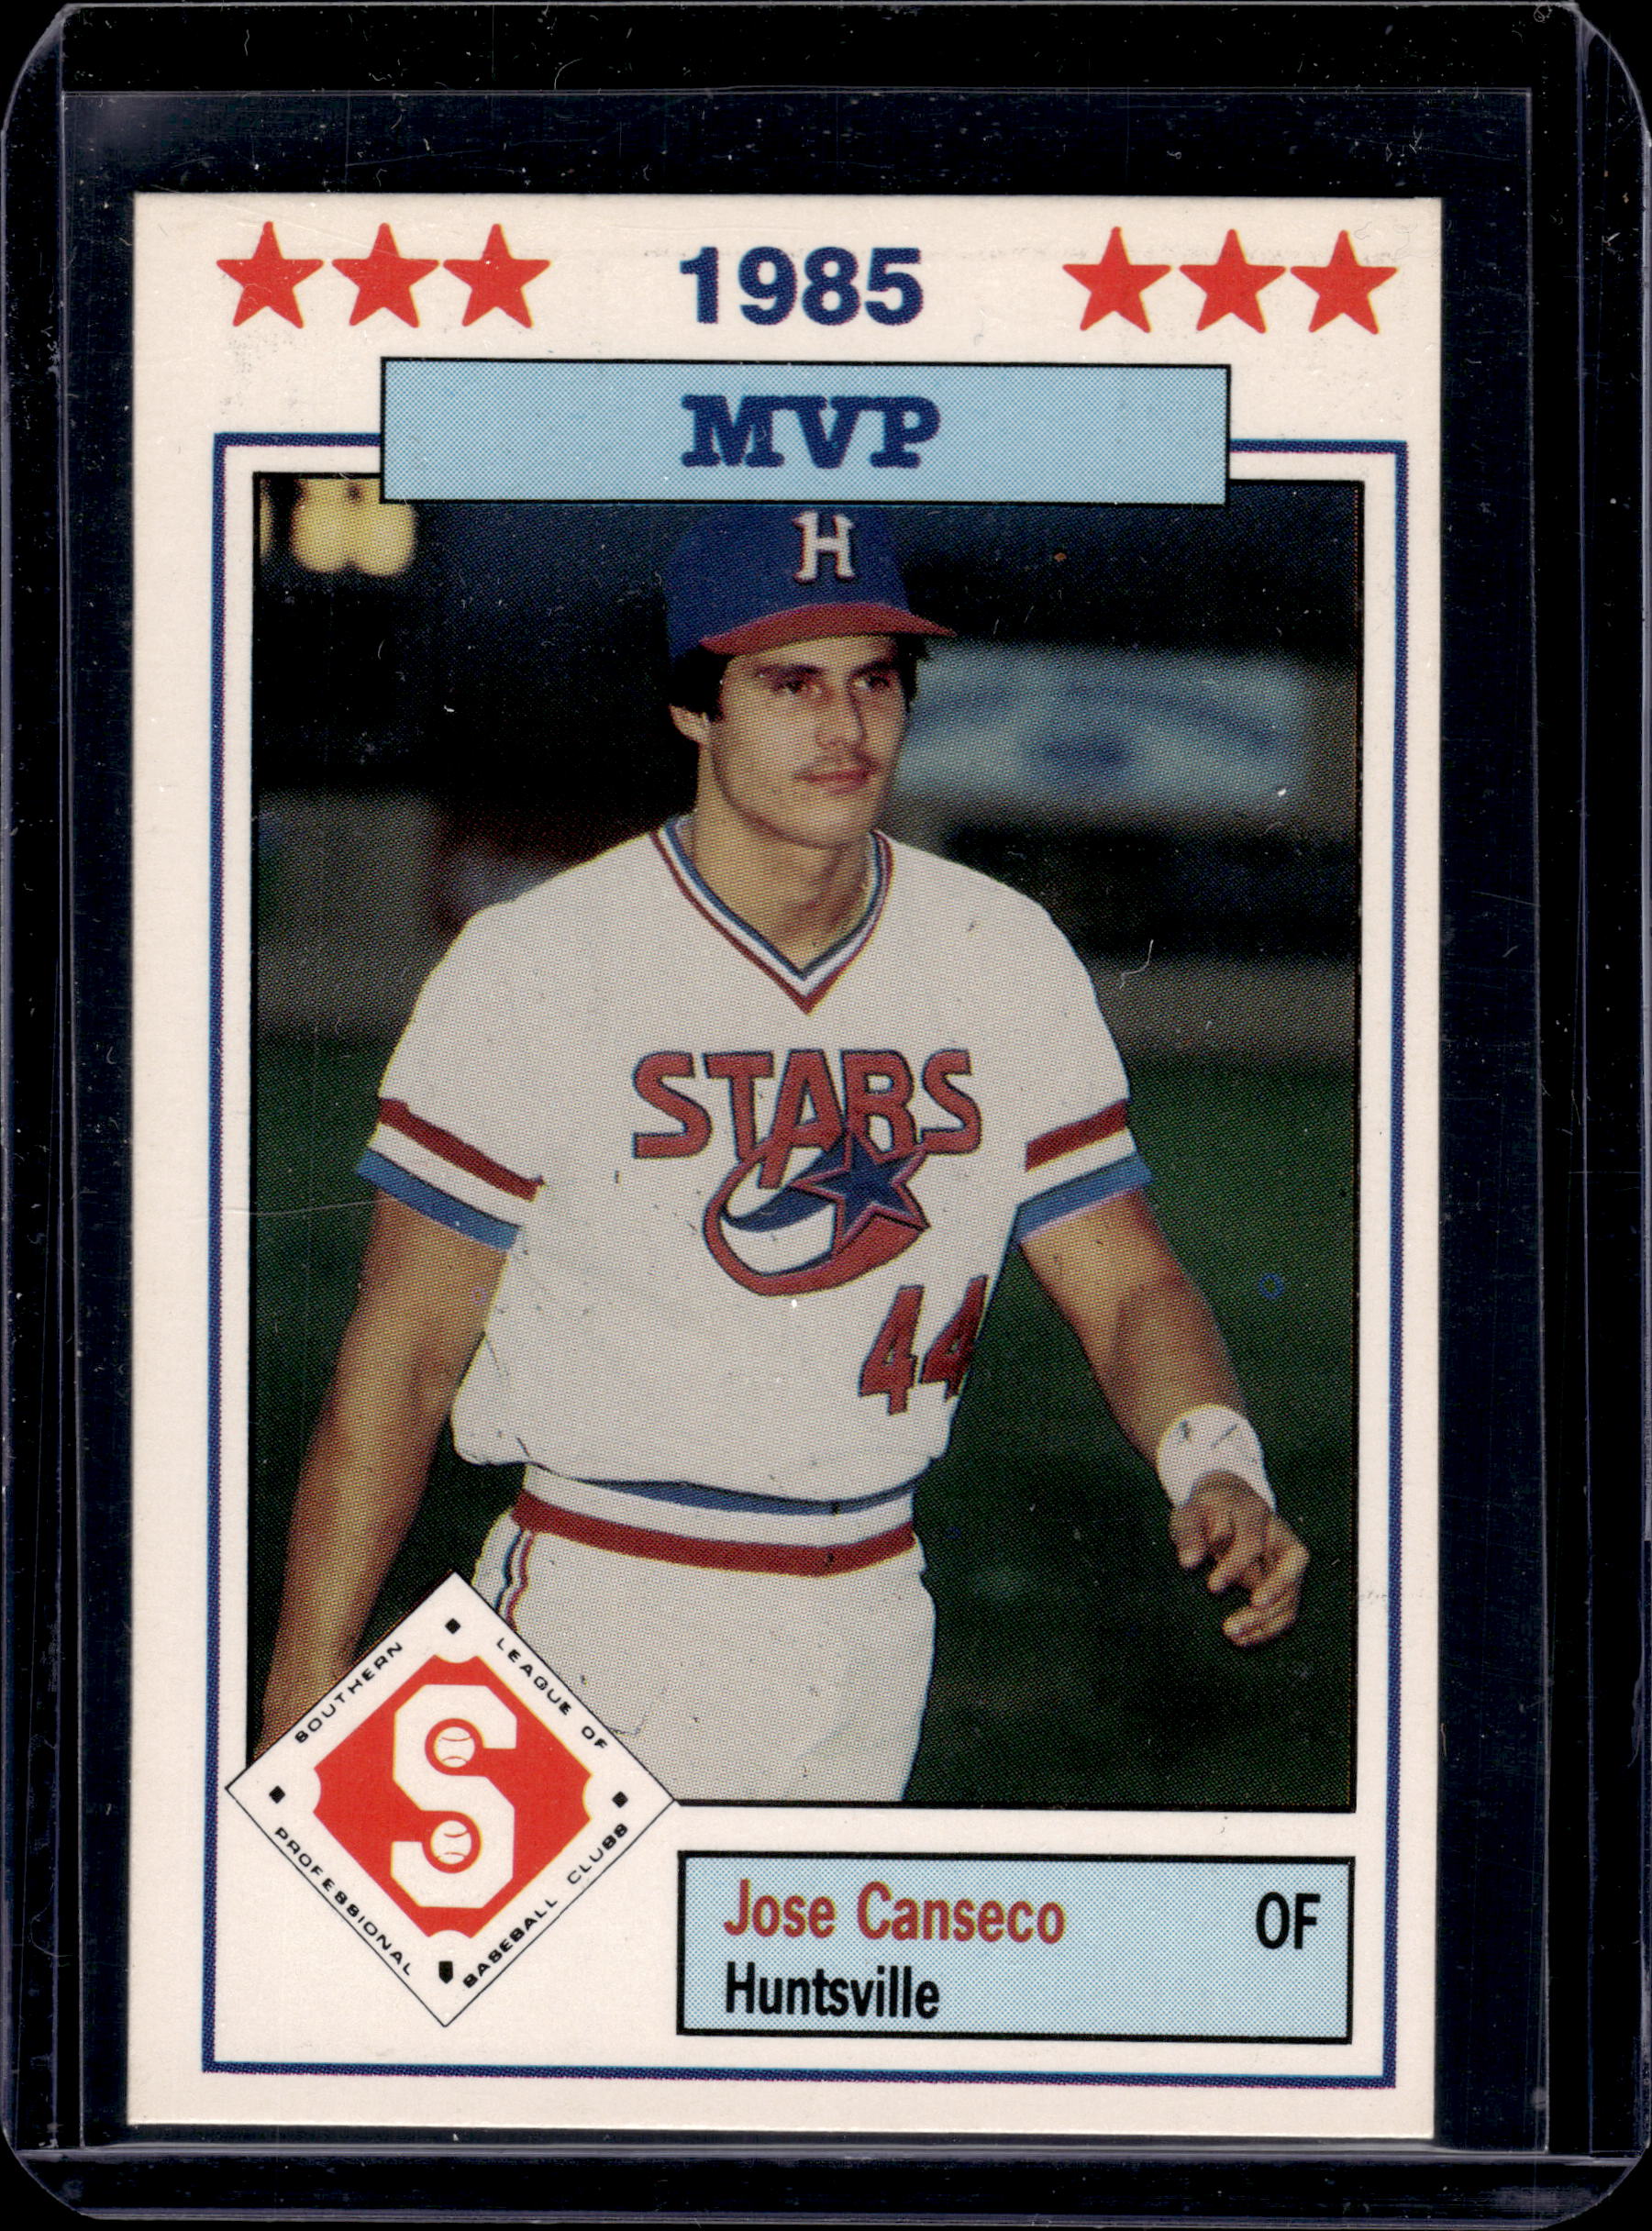 JOSE CANSECO 1985 HUNTSVILLE STARS ROOKIE CARD